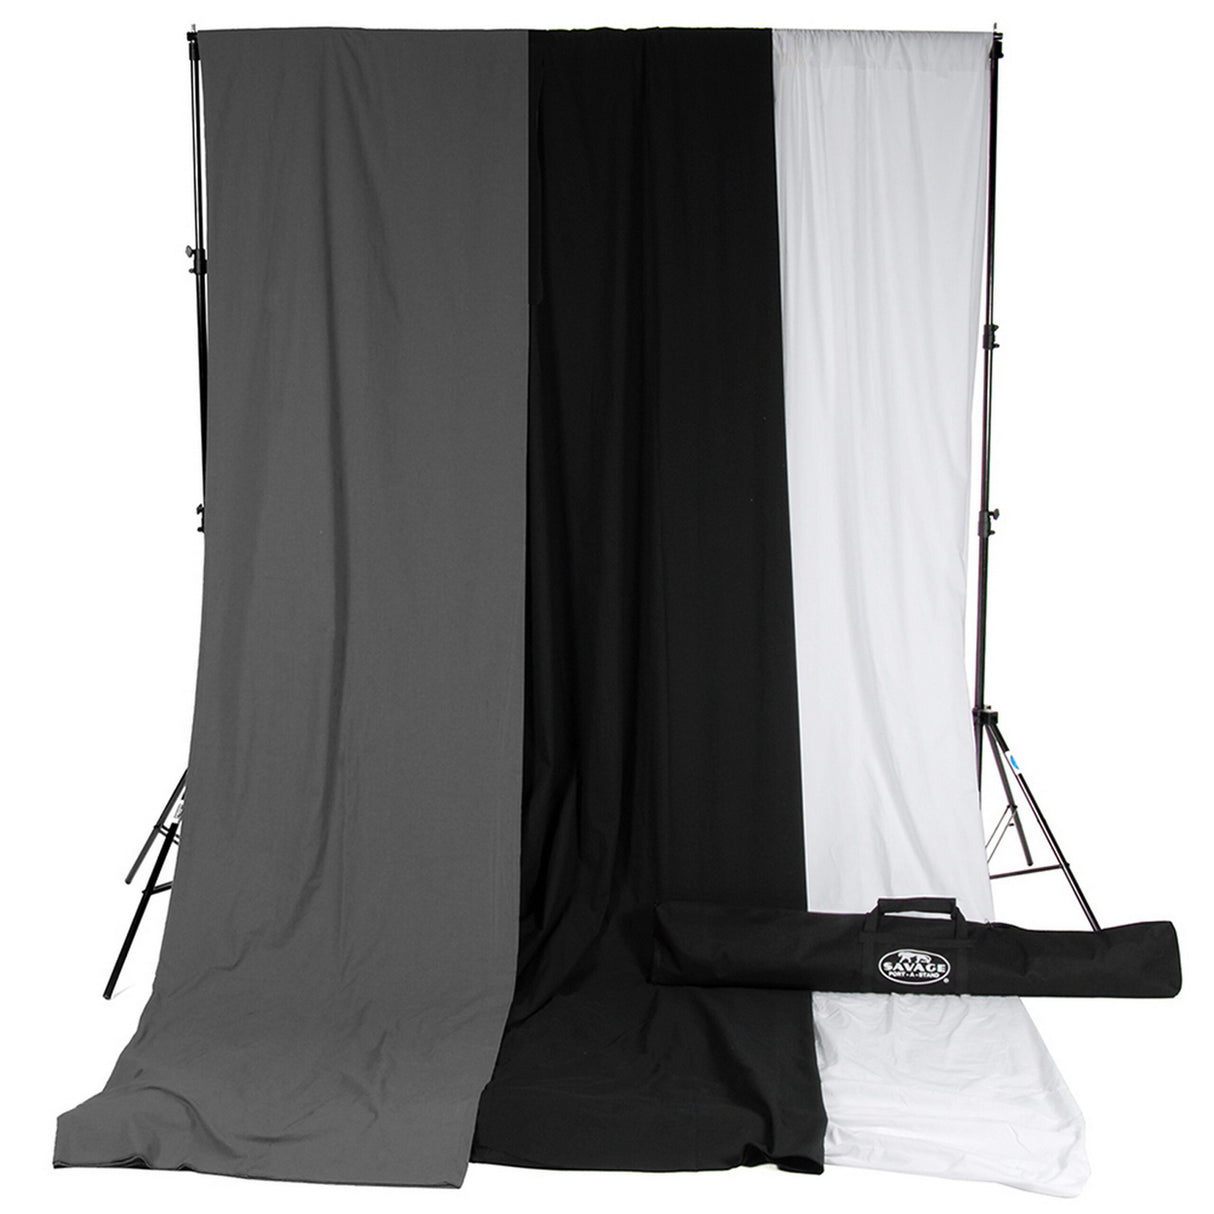 Savage 011220PAS-24 10 x 24-Feet Solid Muslin Background Kit with Port-A-Stand, White/Gray/Black